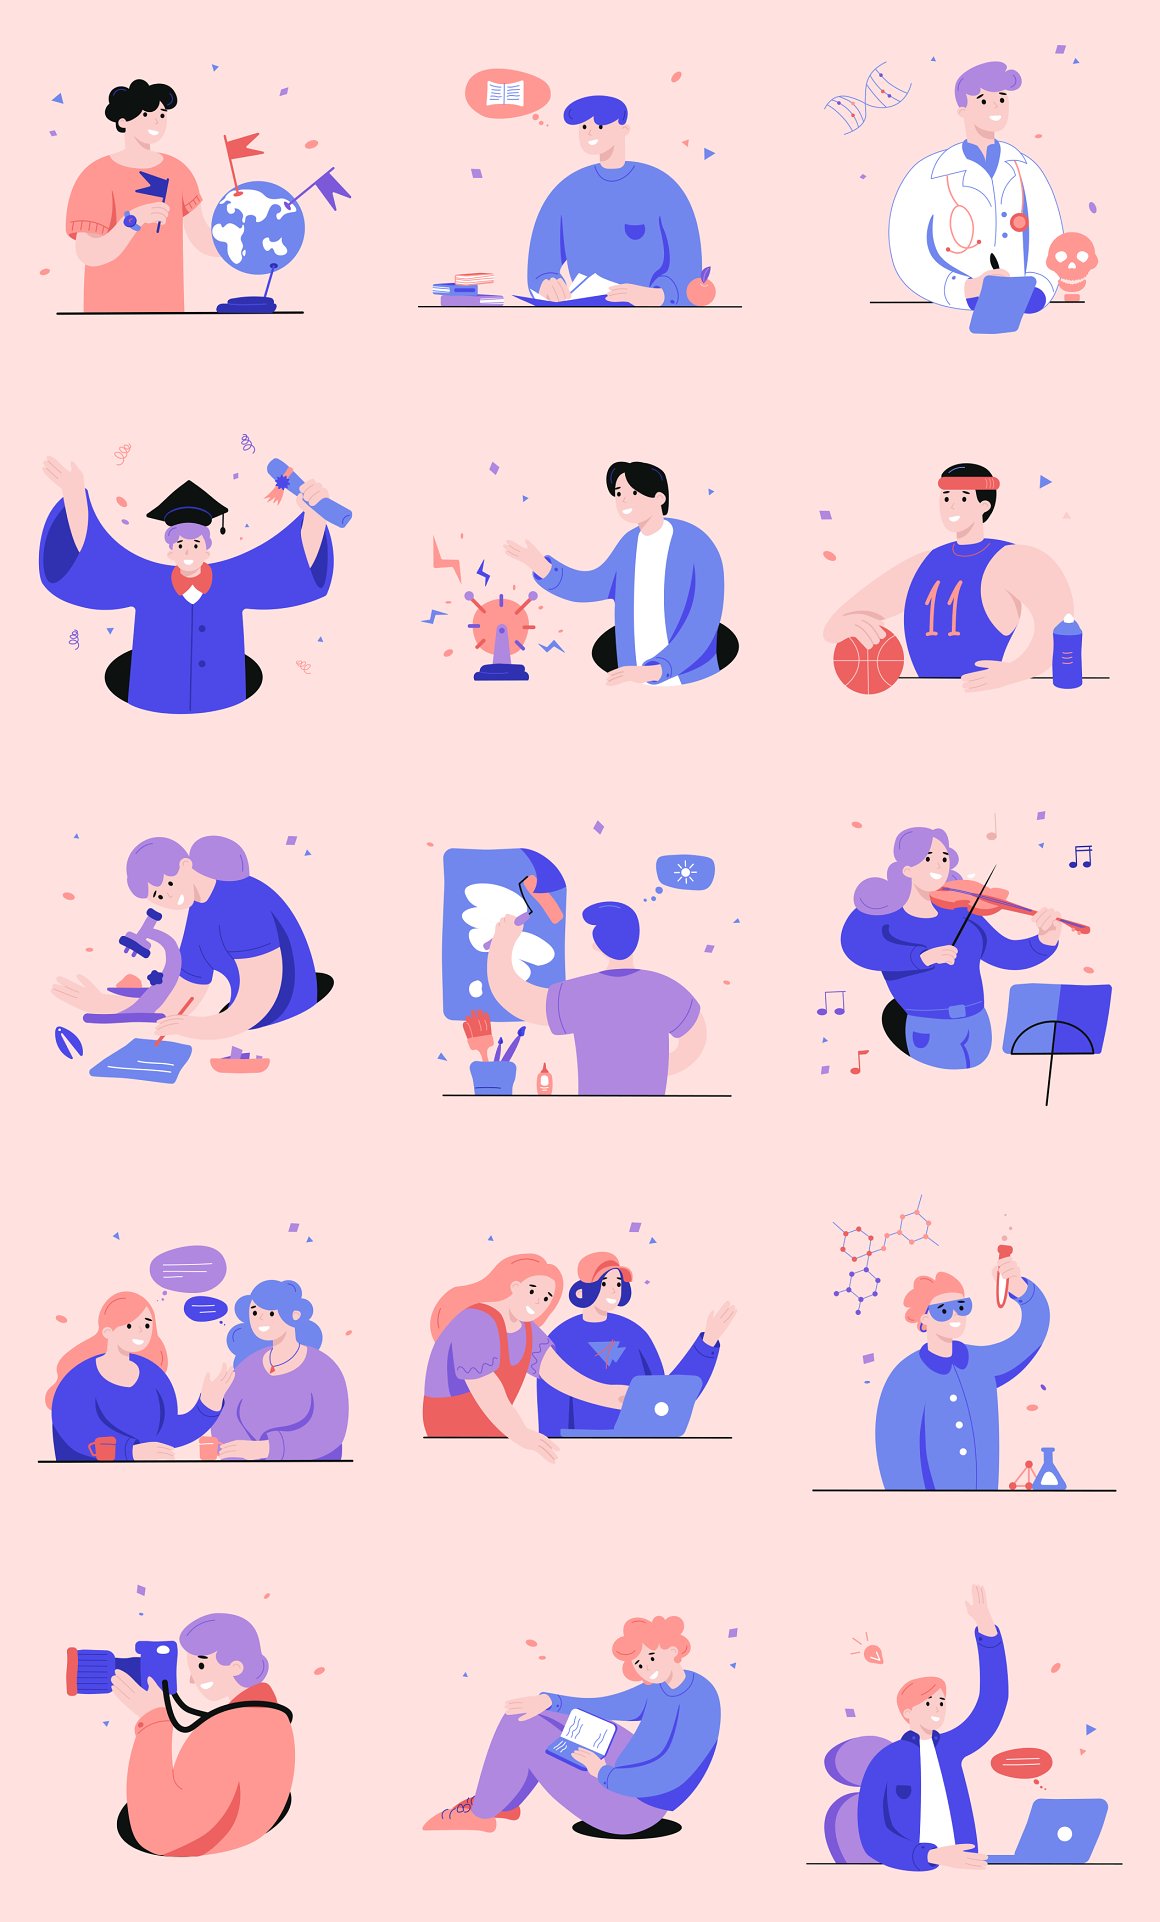 15 different karly illustrations on a pink background.